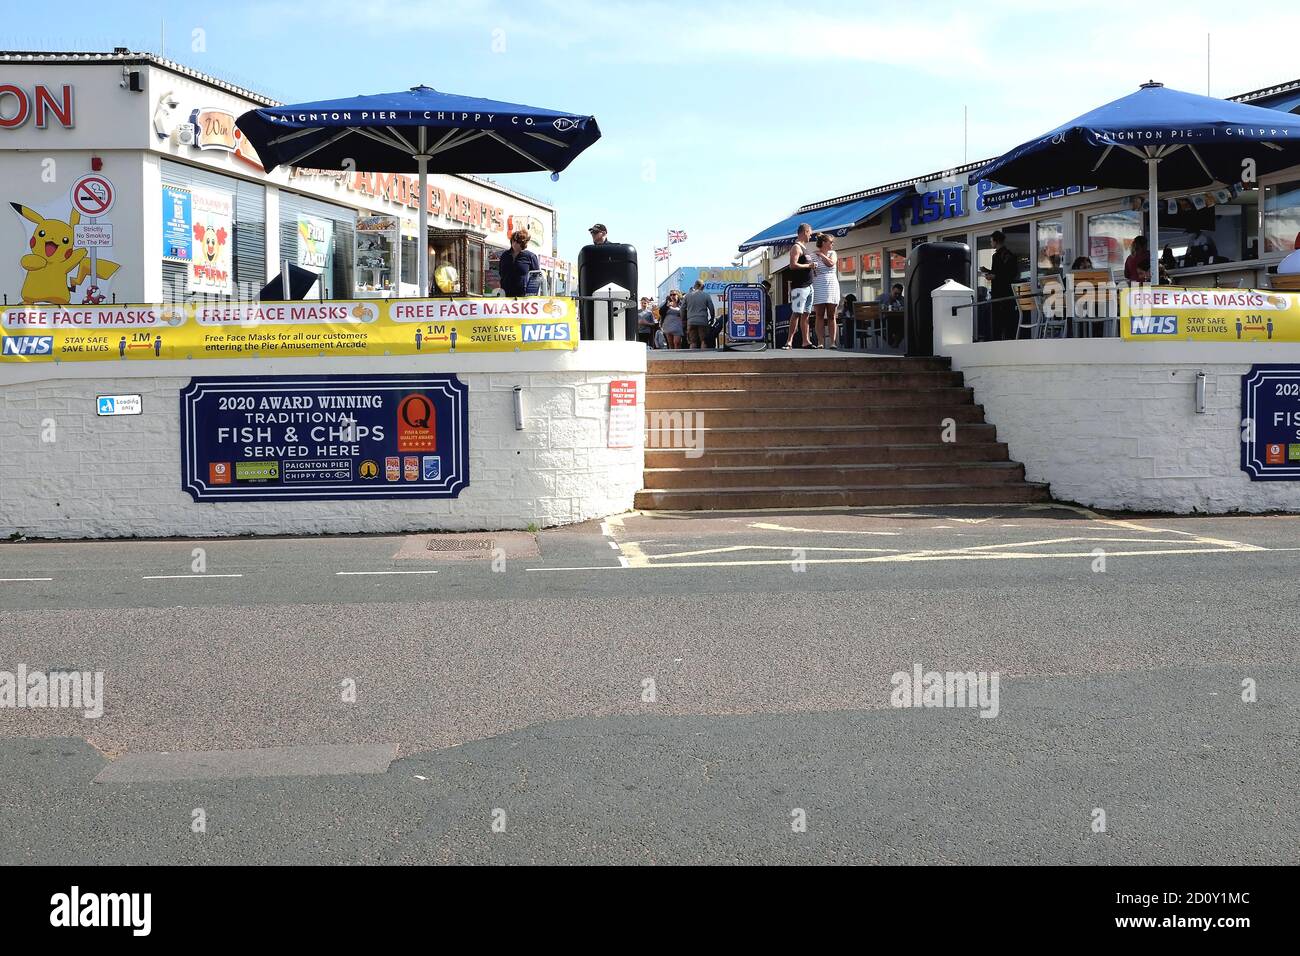 Paignton, Devon, UK. September 18, 2020. Holidaymakers enjoying the shops and amusements of the pier during covid-19 at Paignton in Devon, UK. Stock Photo